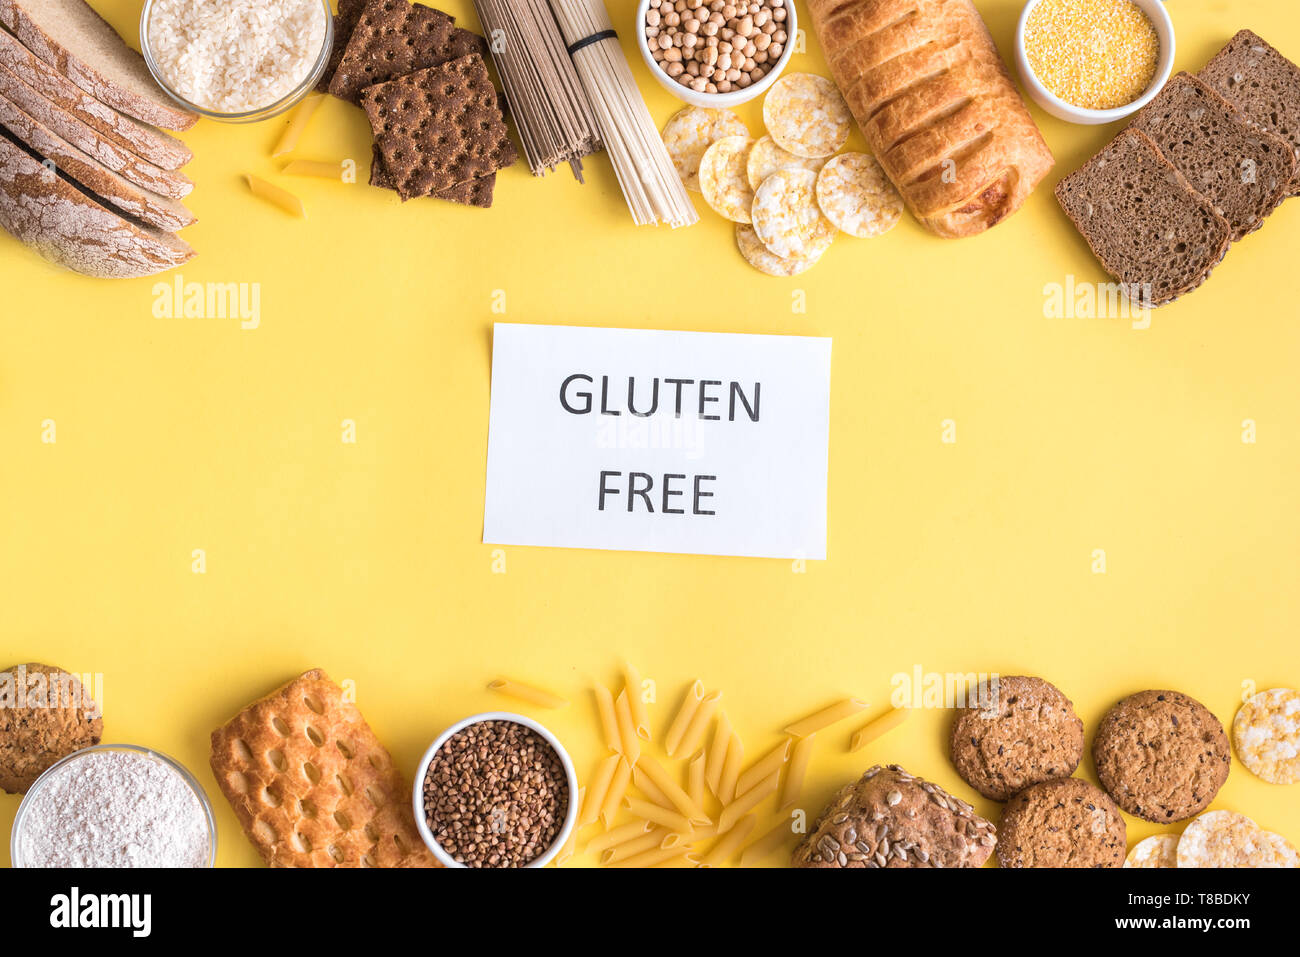 Gluten free food. Various gluten free pasta, bread, snacks and flour on yellow background, top view, copy space. Stock Photo